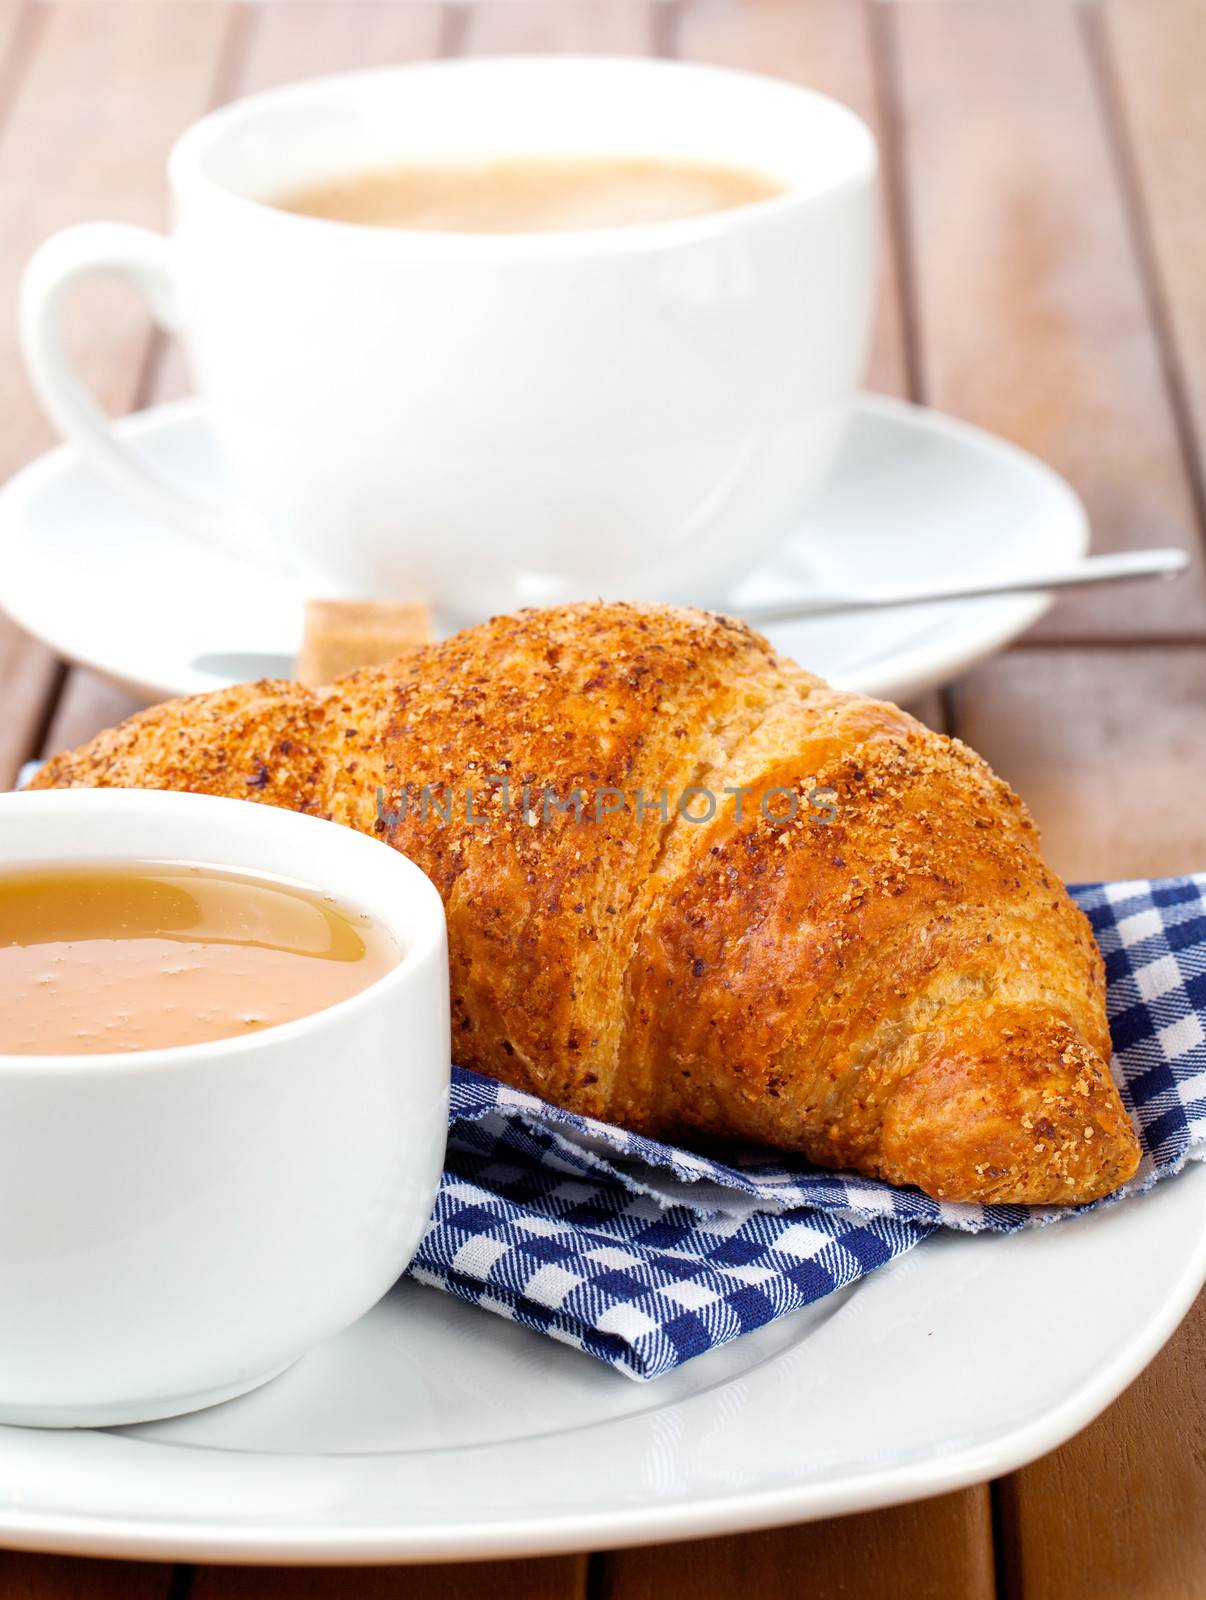 Croissant with marmalade  and caffee cup. on wooden backgroun by motorolka